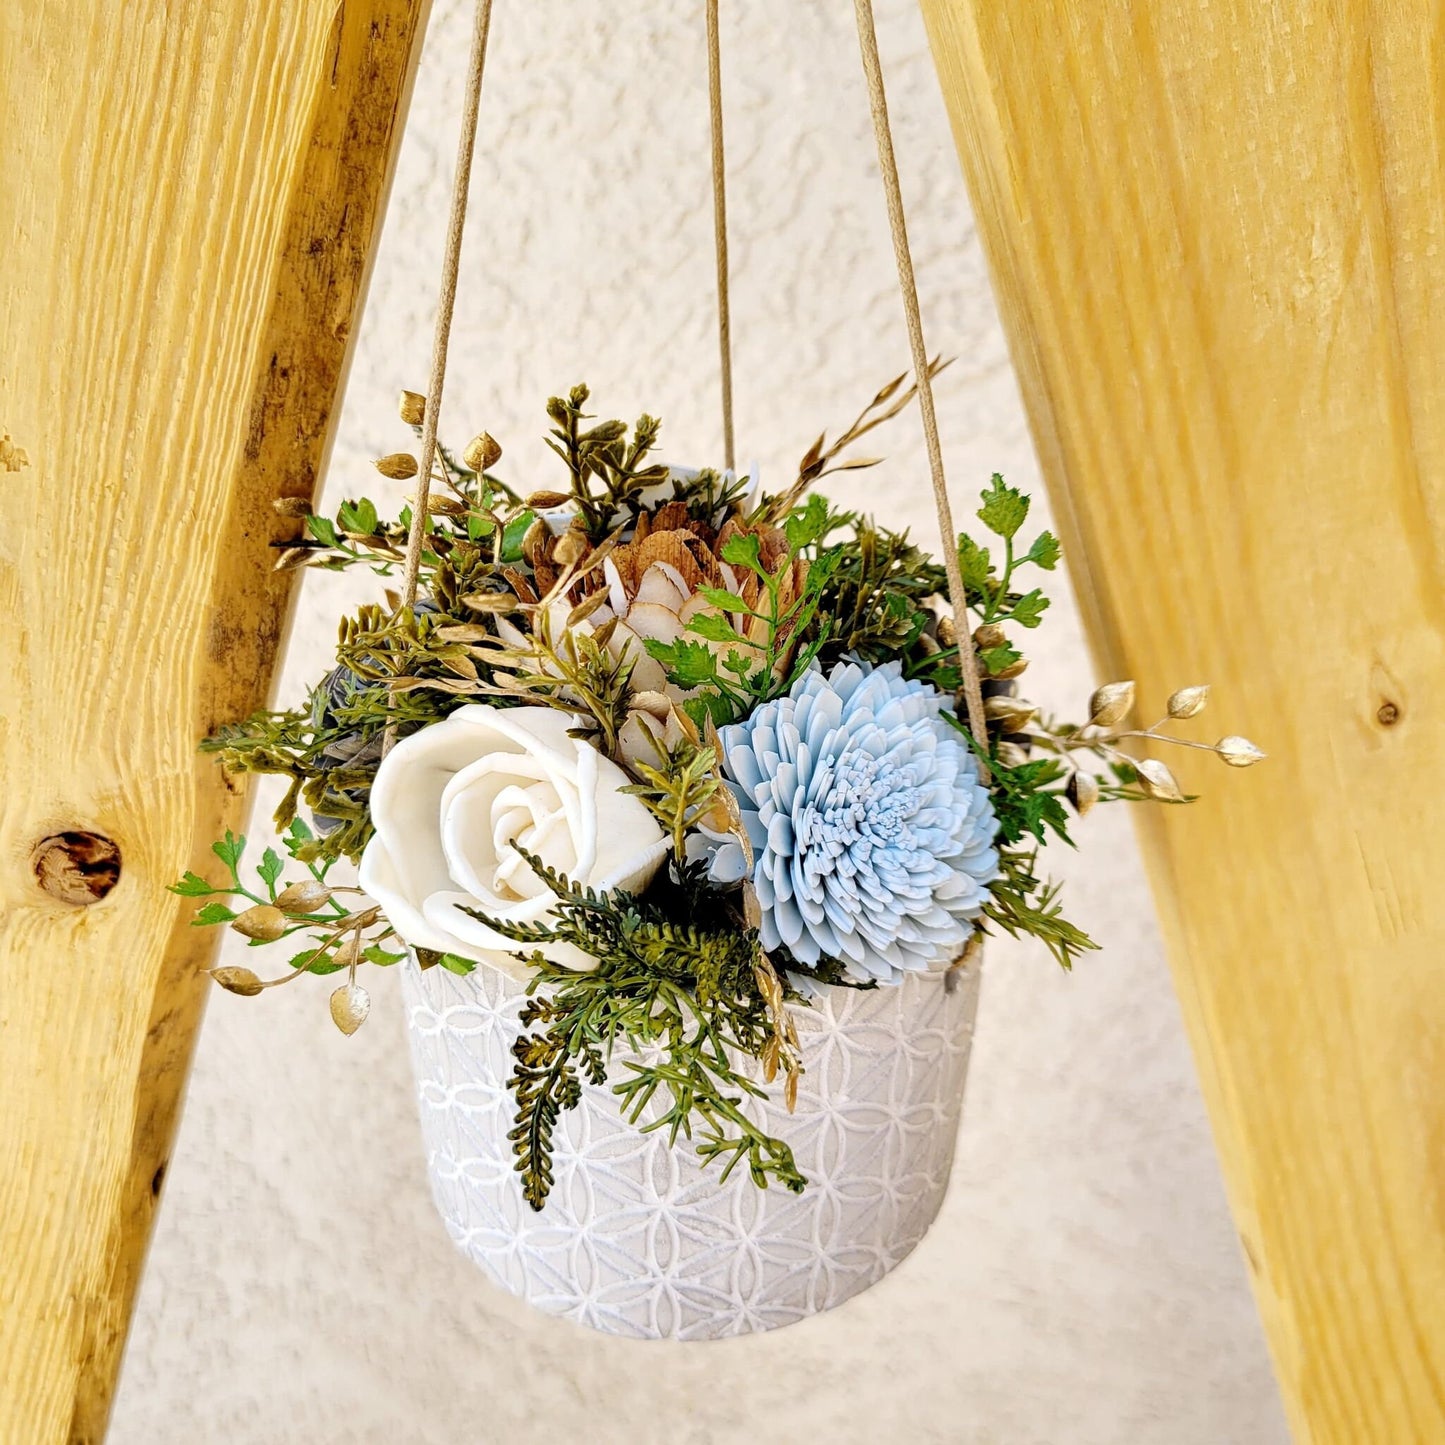 Wood Flower Hanging Planter, Wooden Flowers Housewarming Gift, Cement Planter with Fake Flowers, Wood Flowers Succulent planter